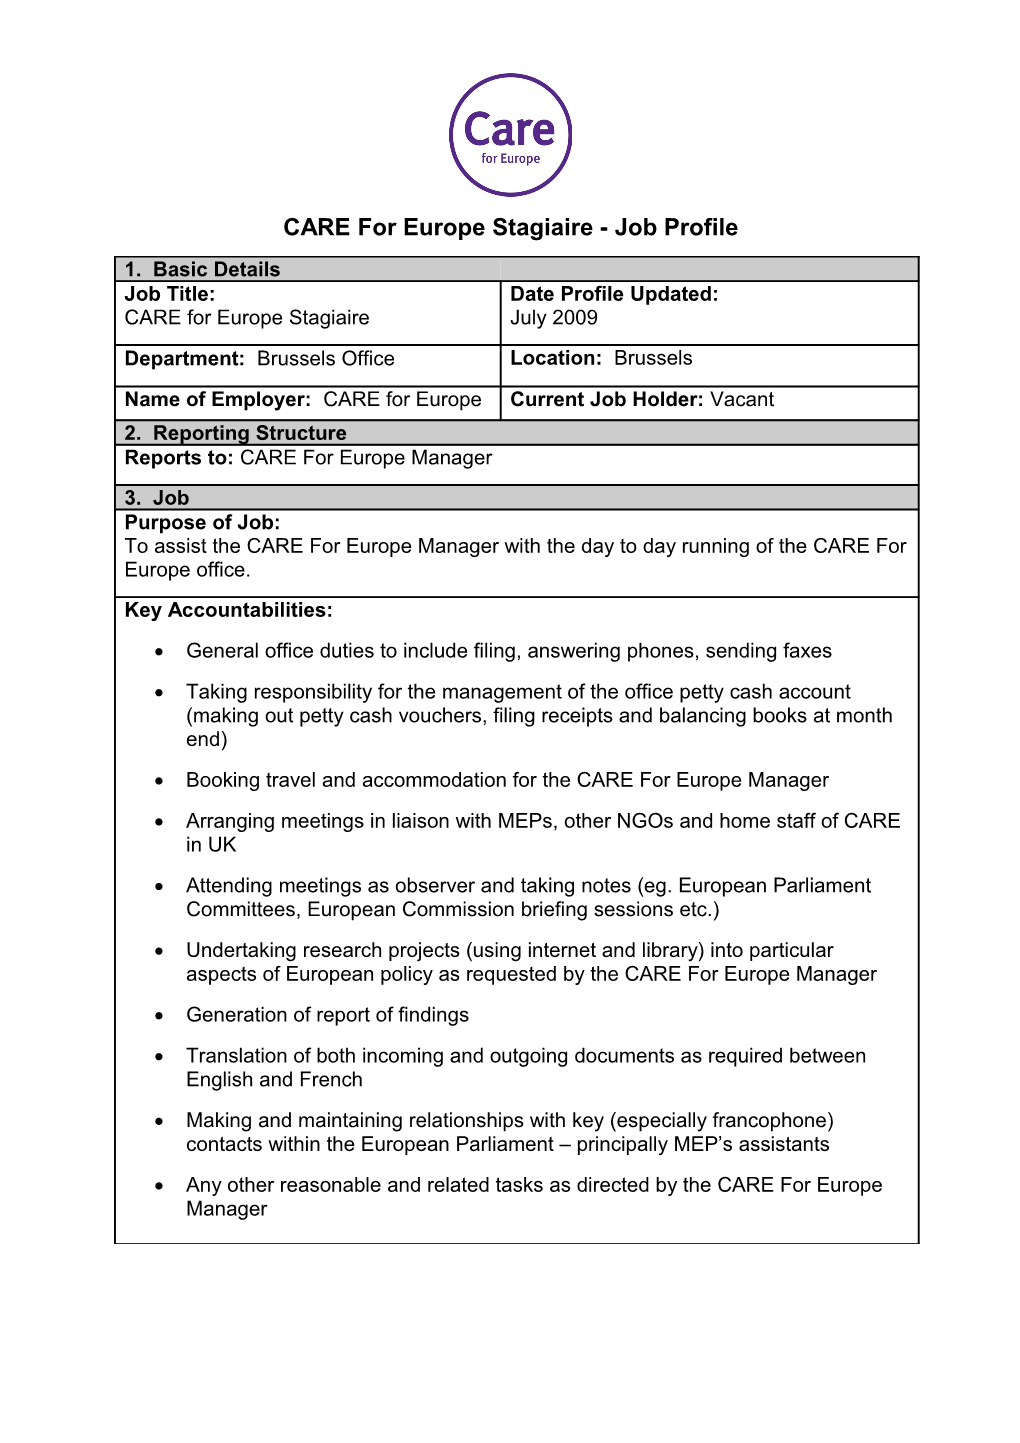 CARE for Europe Stagiaire - Job Profile